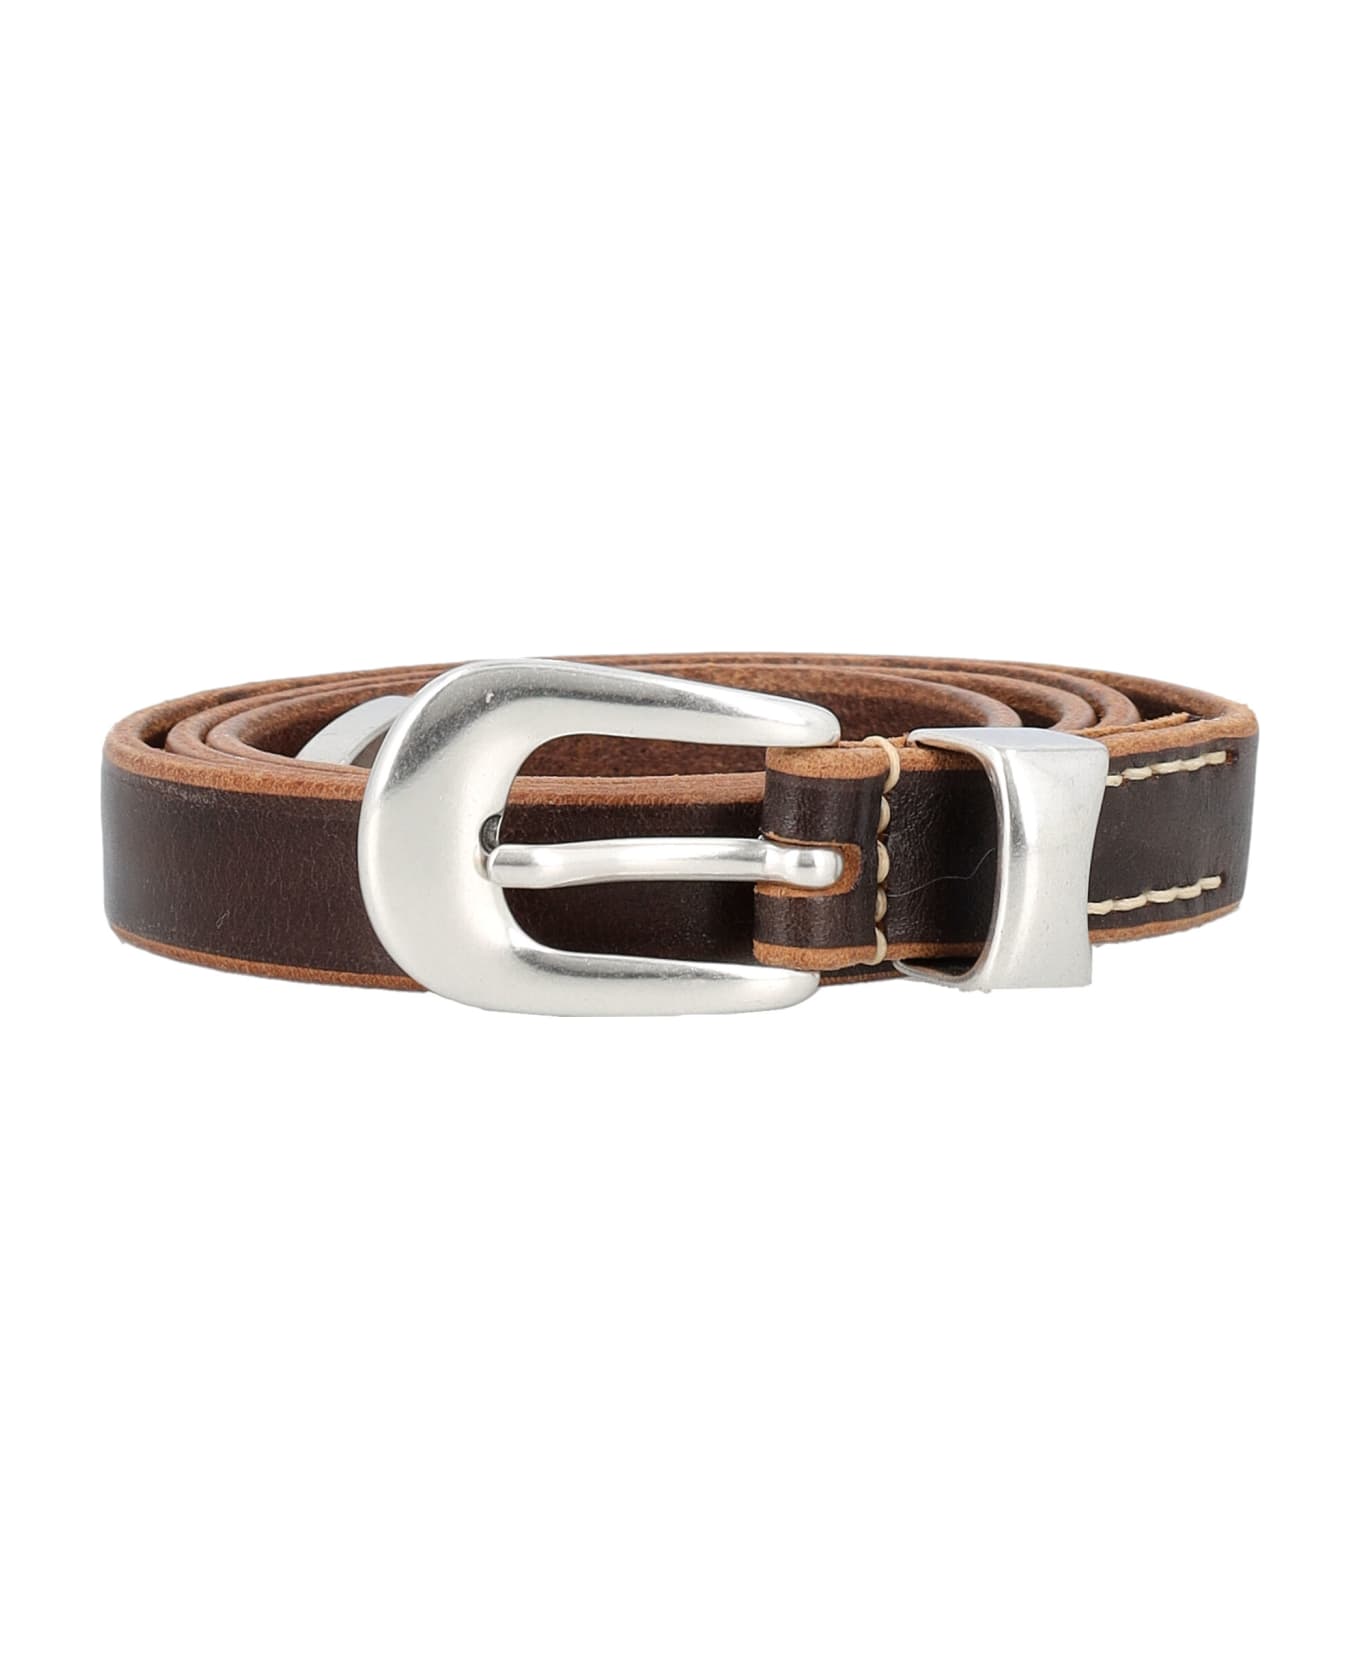 Our Legacy Leather Belt - BROWN LEATHER